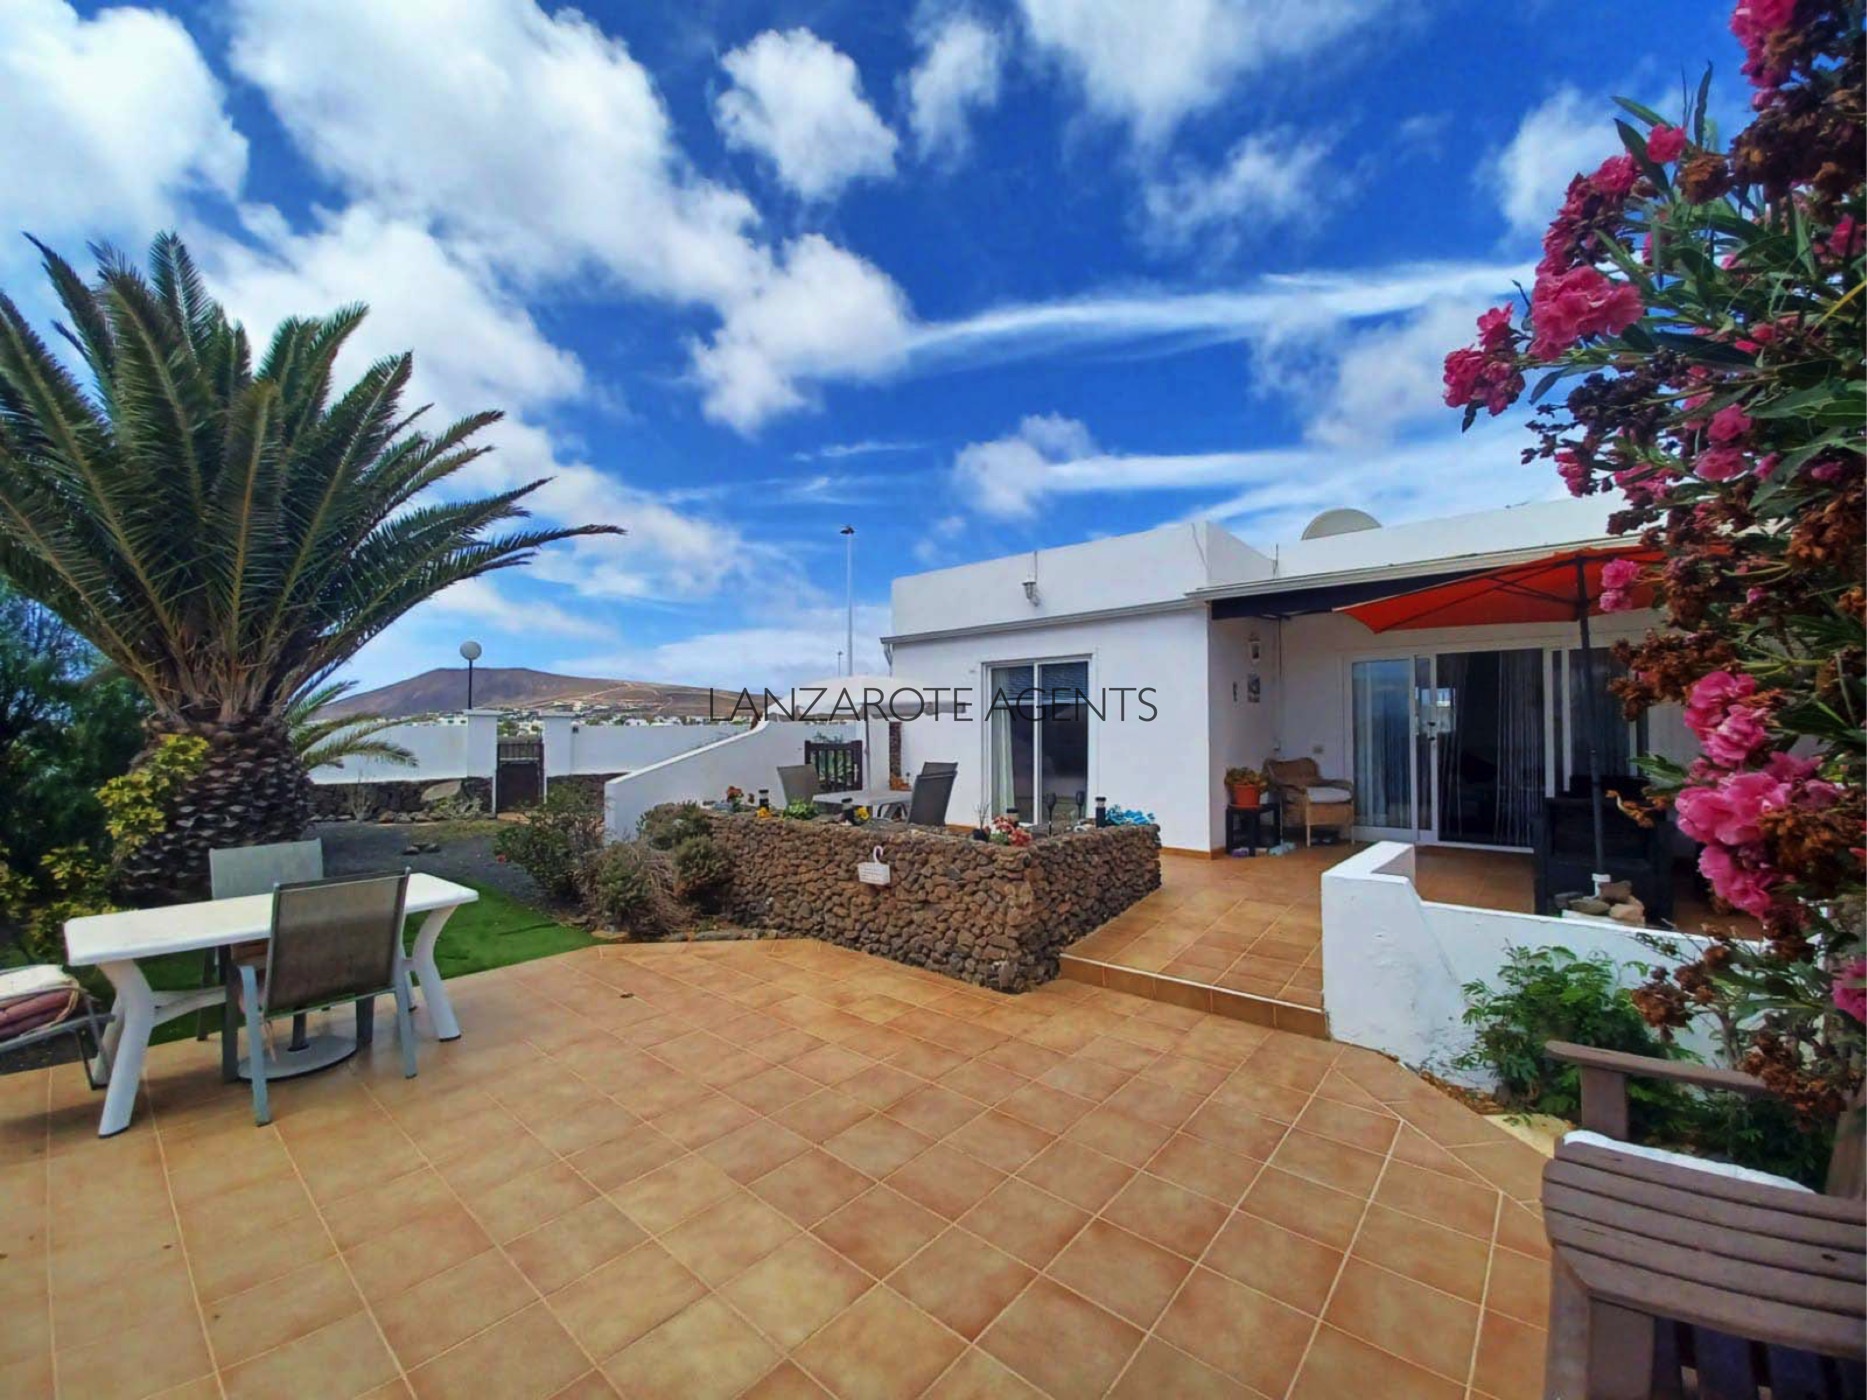 Lovely 2 Bedroom Villa Close to Playa Blanca Town Centre Sitting on a Big Plot,  Spectacular Mountain Views and Great Potential